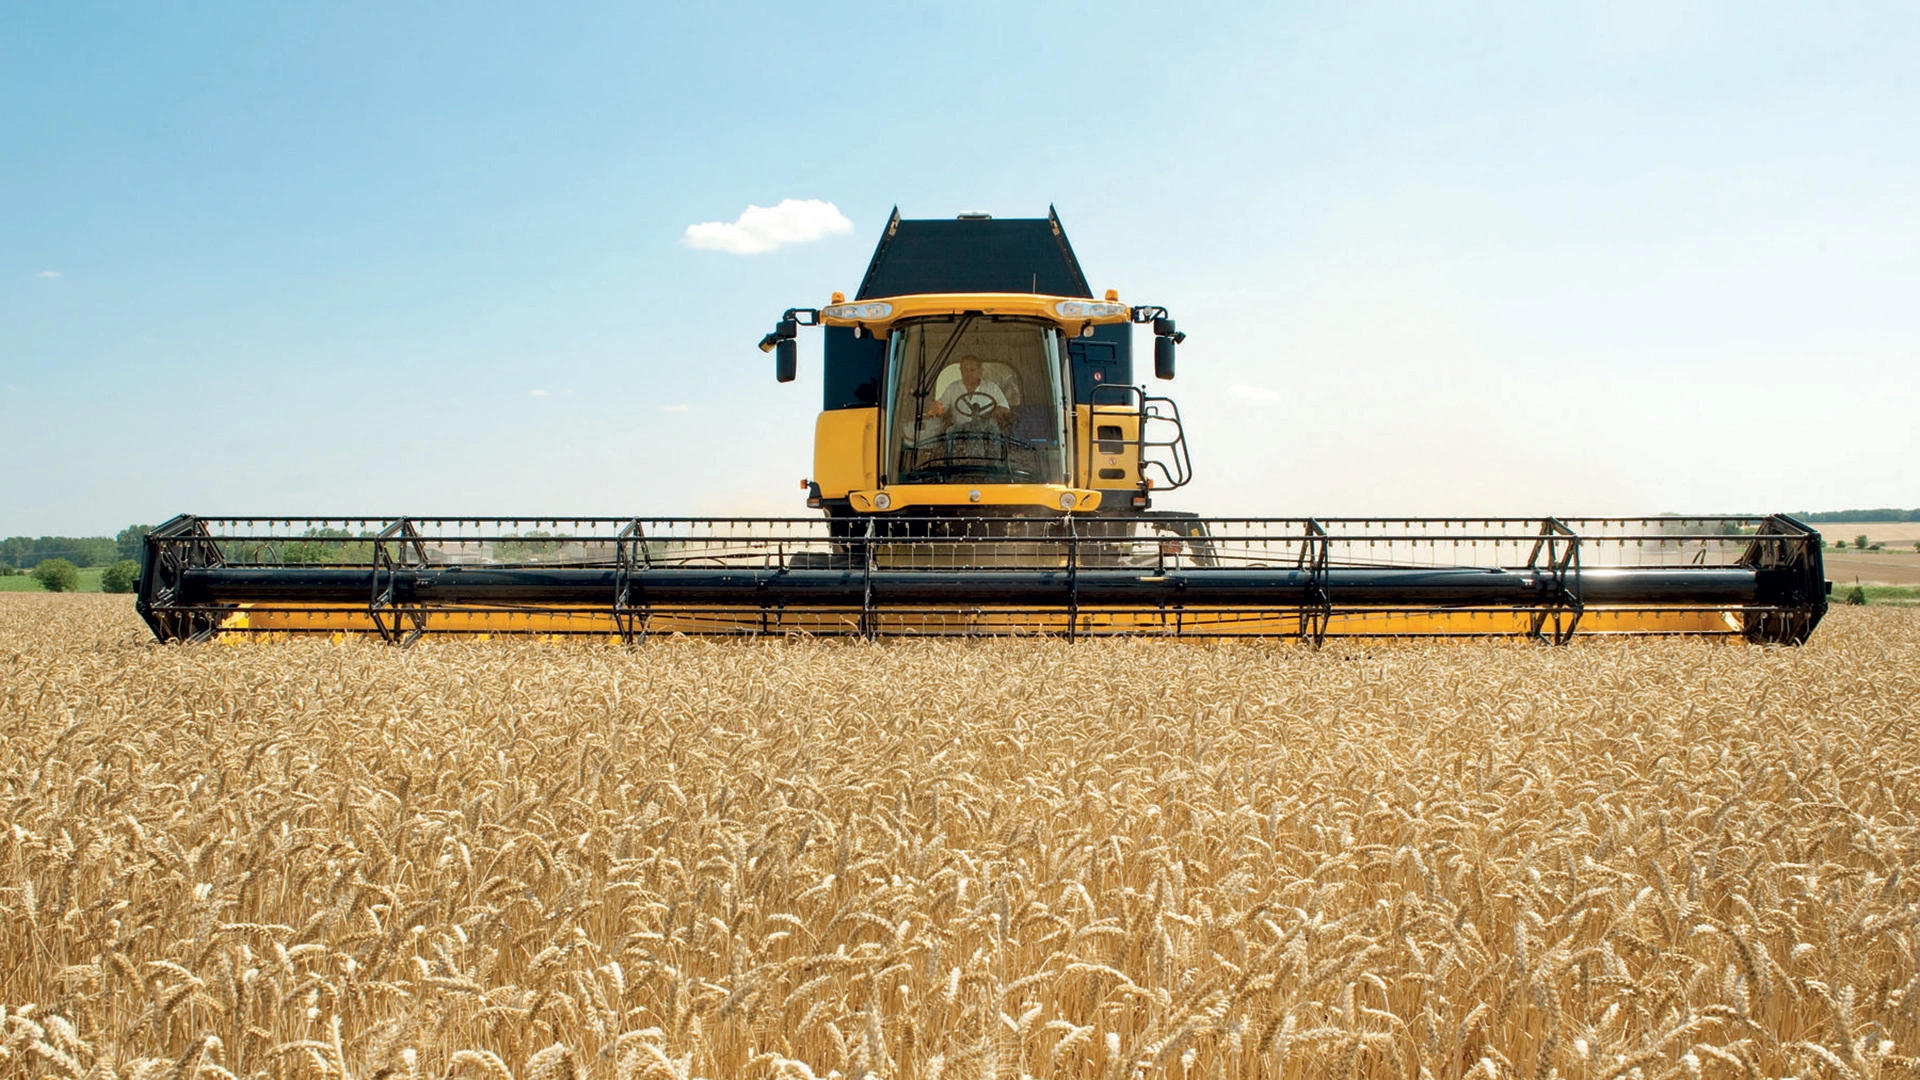 New Holland combine in action, efficiently harvesting with High Capacity Grain Headers